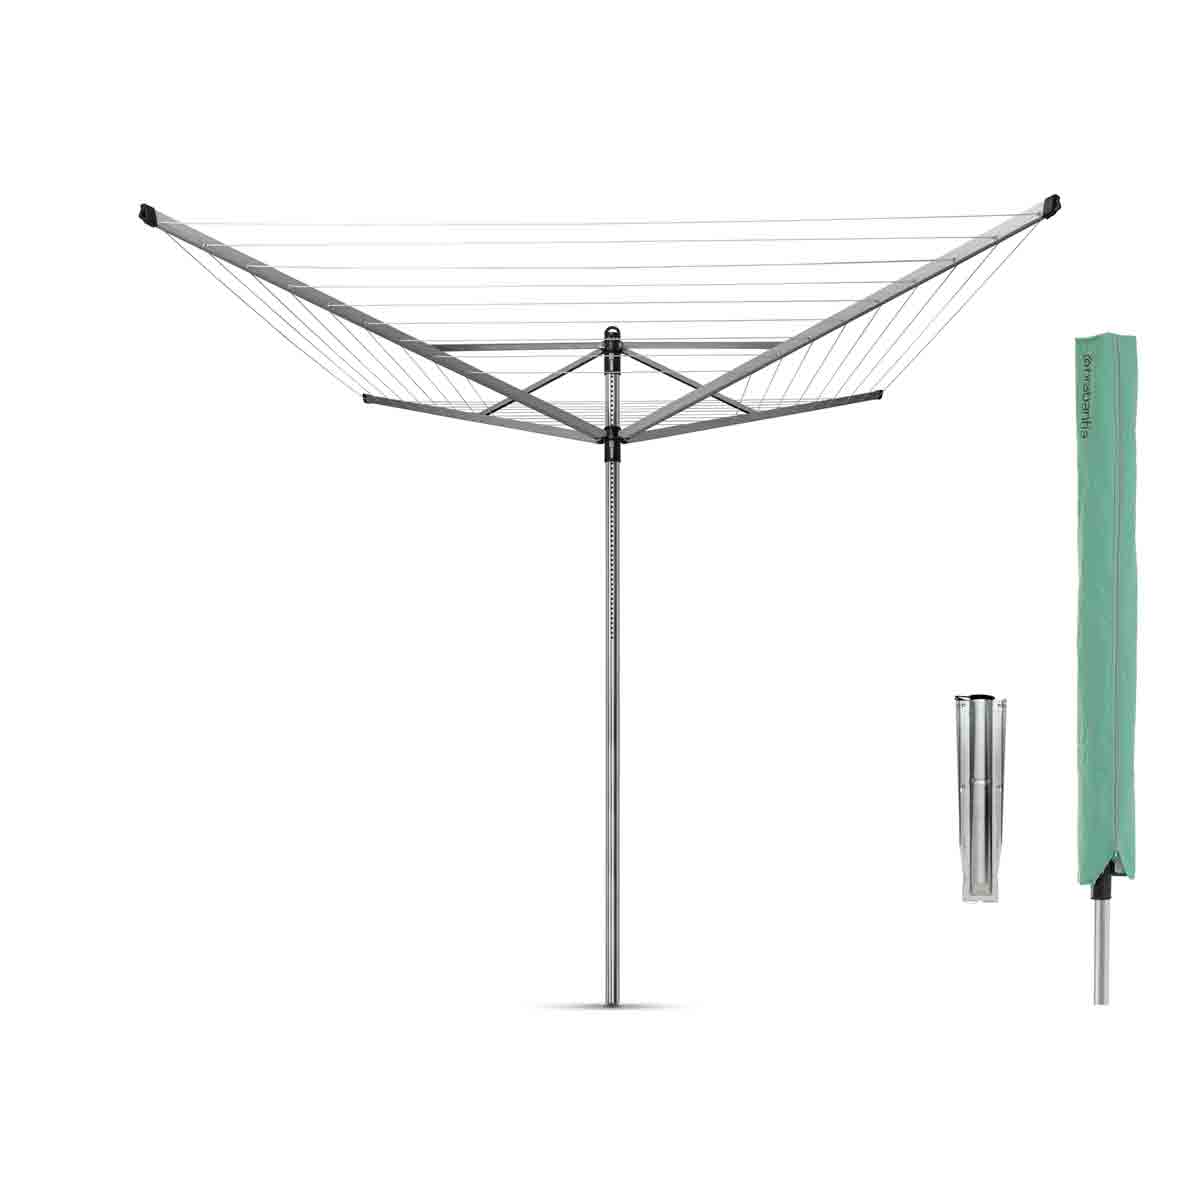 Brabantia Lift-o-matic 60m Rotary Dryer With Ground Spike And Cover 45mm - Metallic Grey